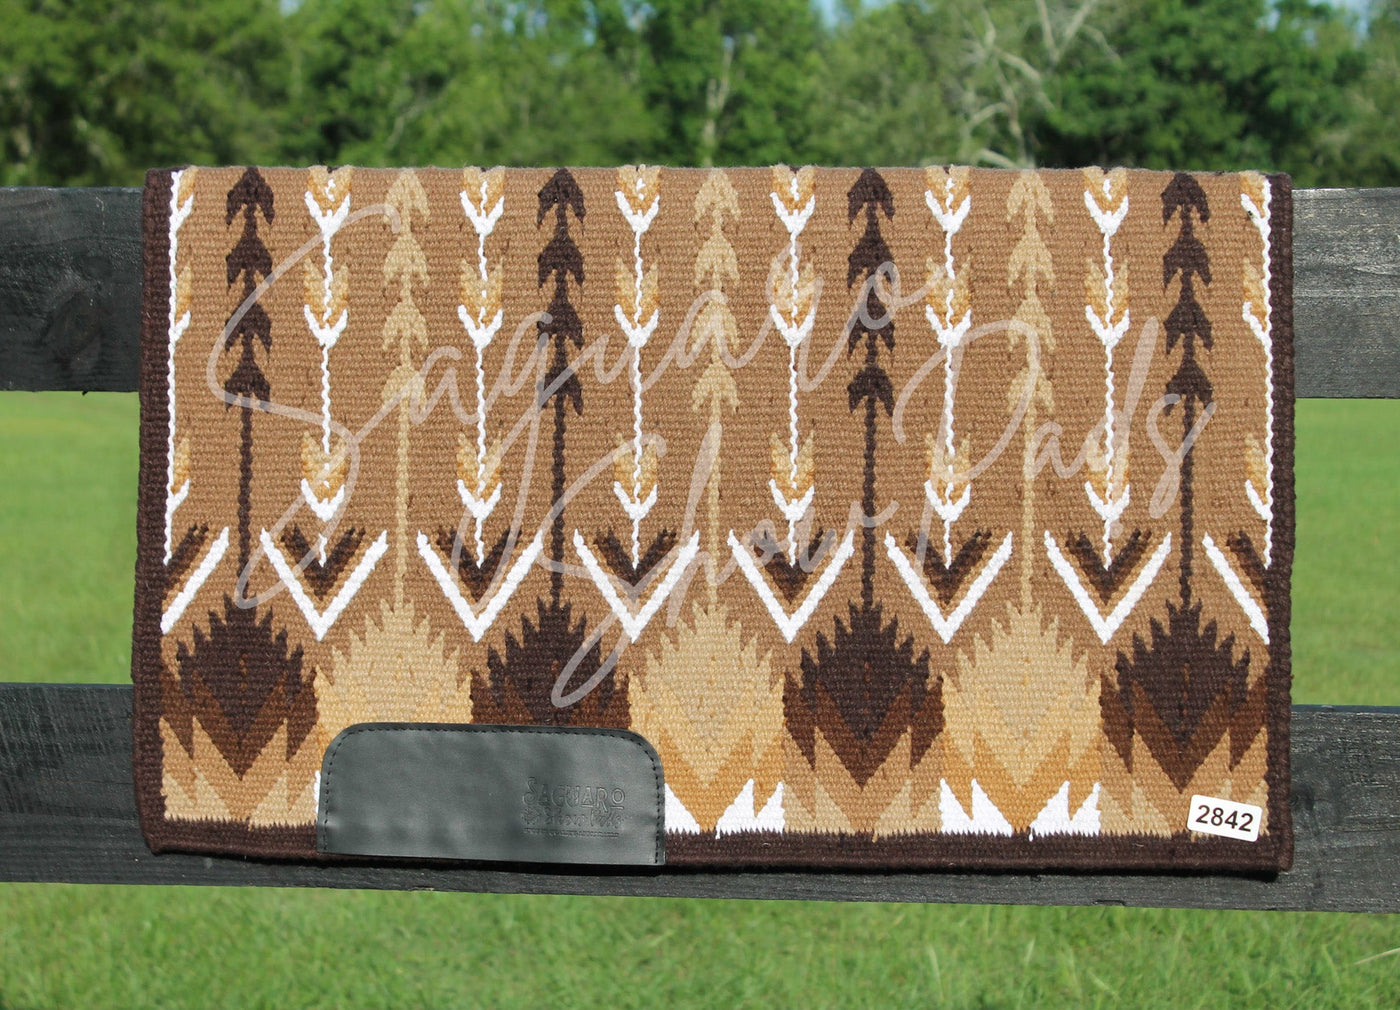 #2842 "Scout" Ranch Pad - Re-Order